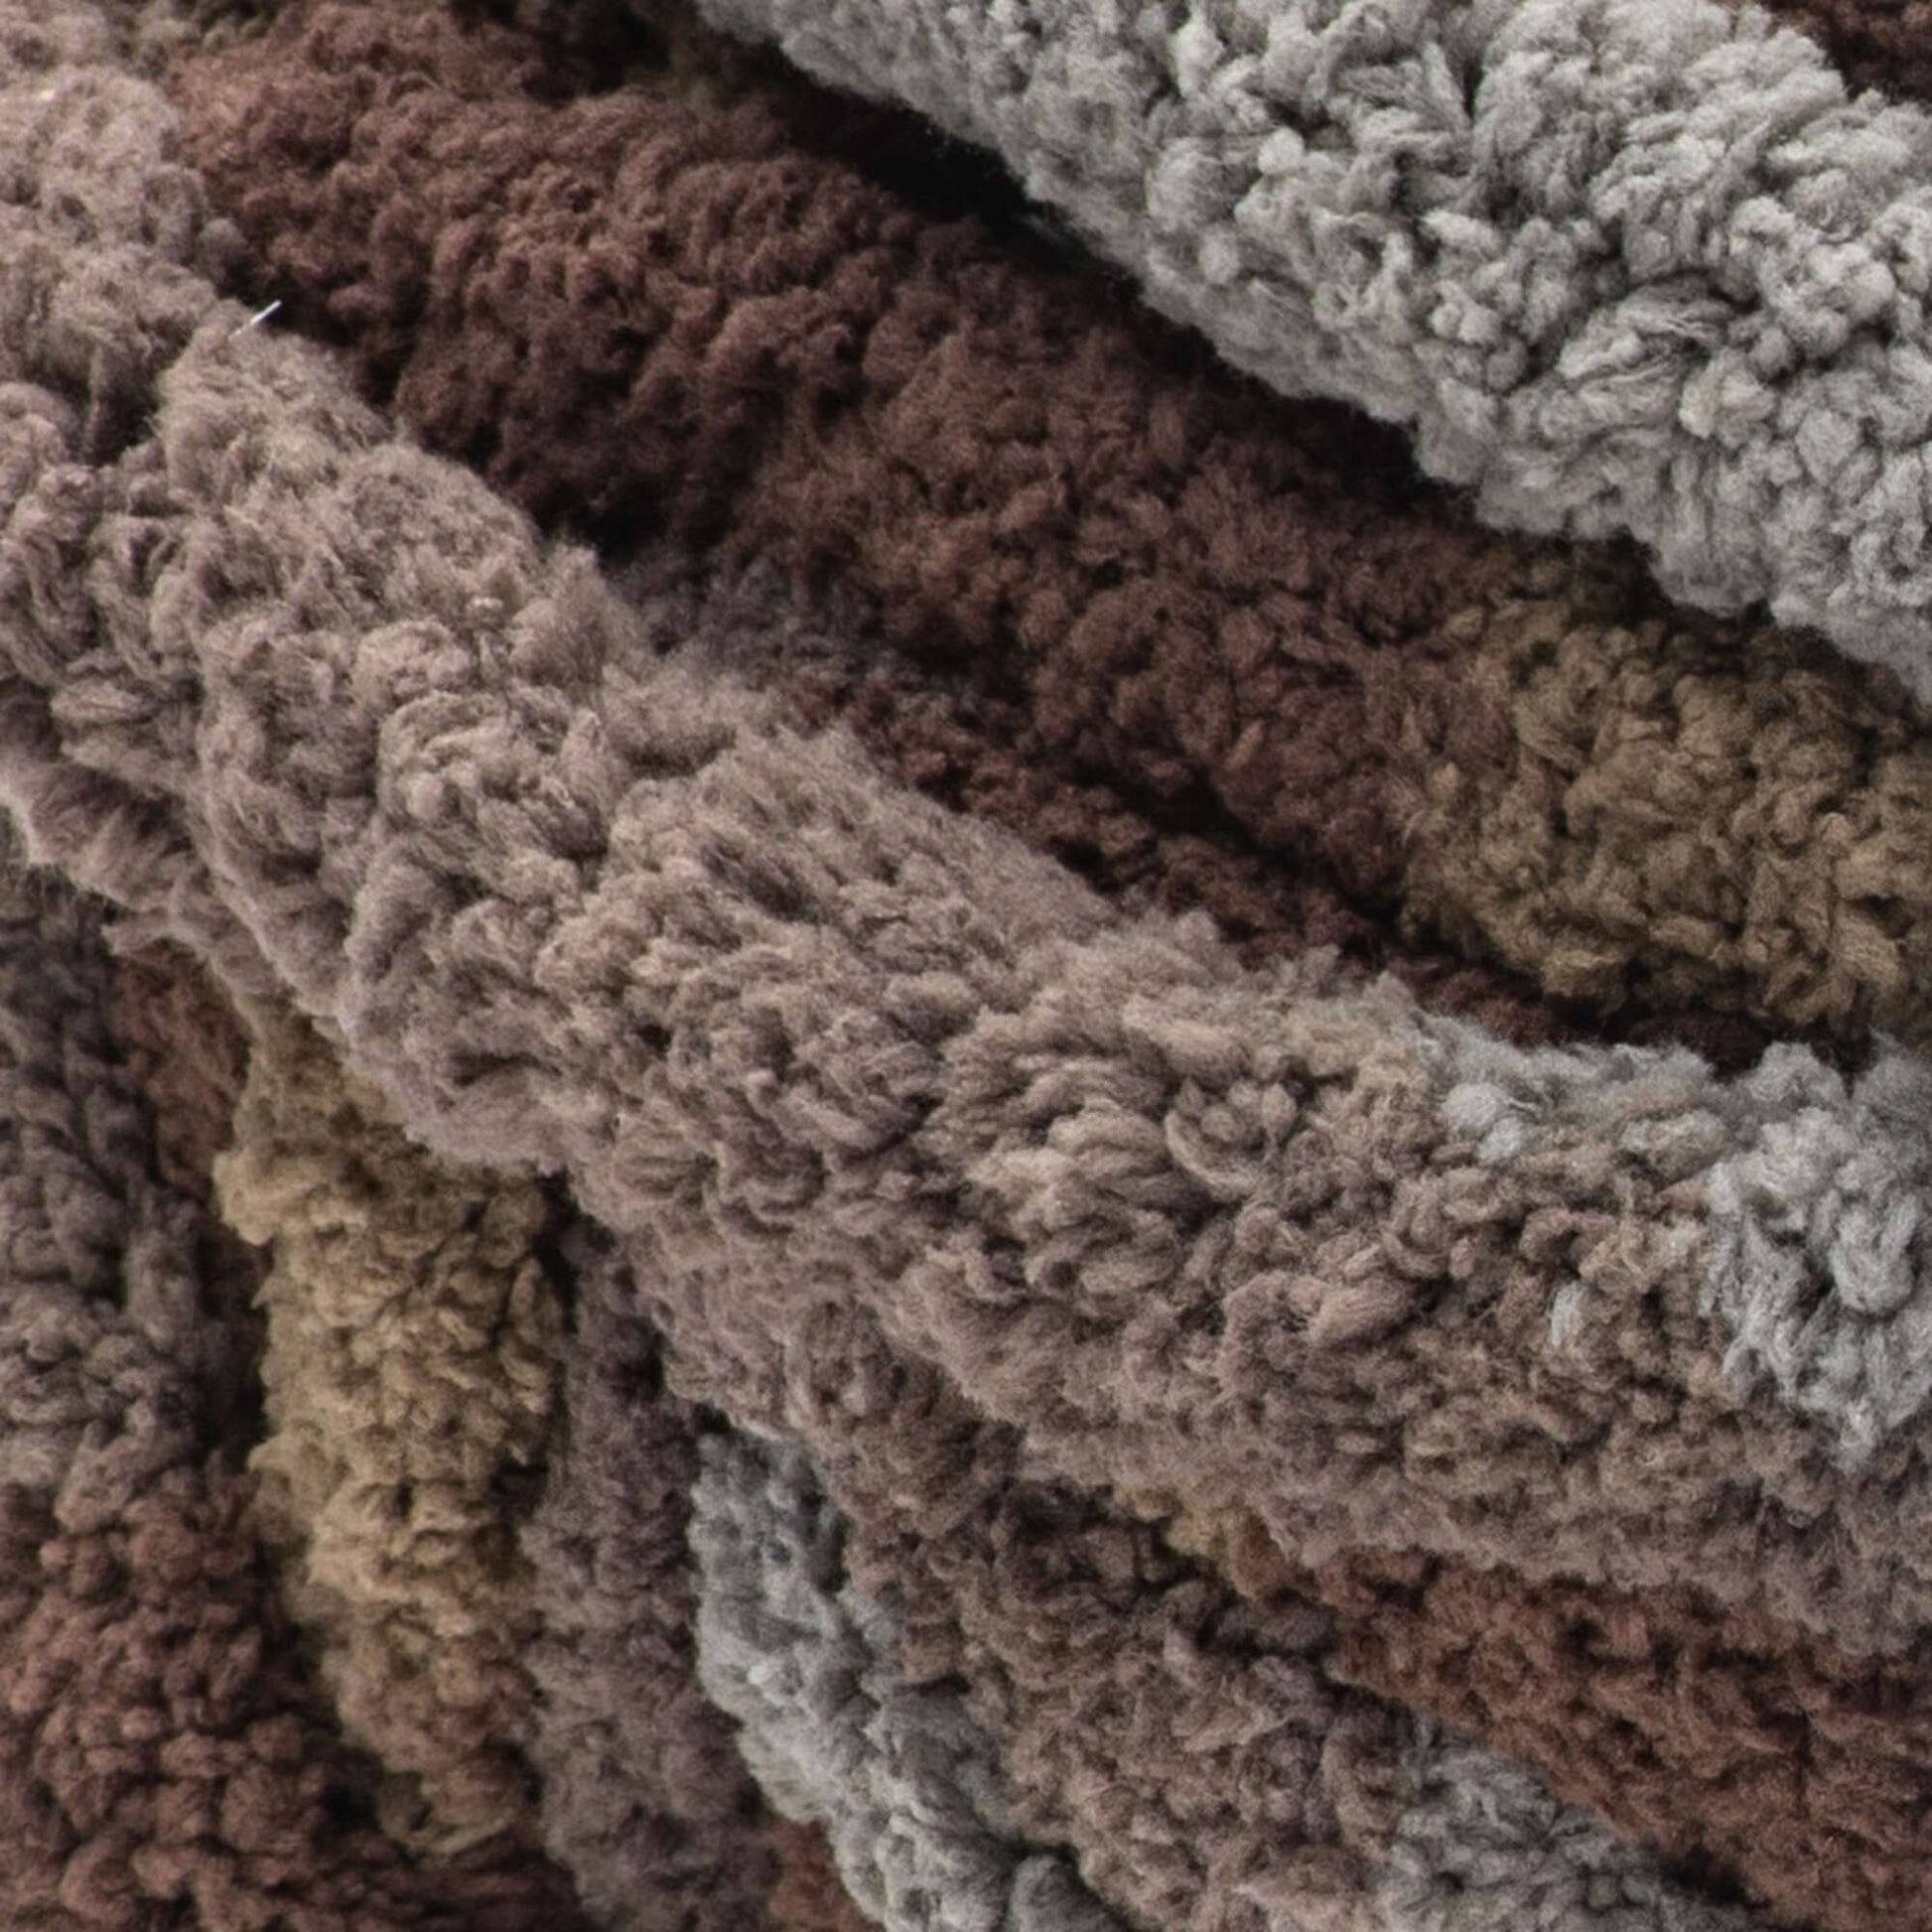 Bernat Blanket Extra Thick Yarn (600g/21.2oz) - Discontinued Shades Leather